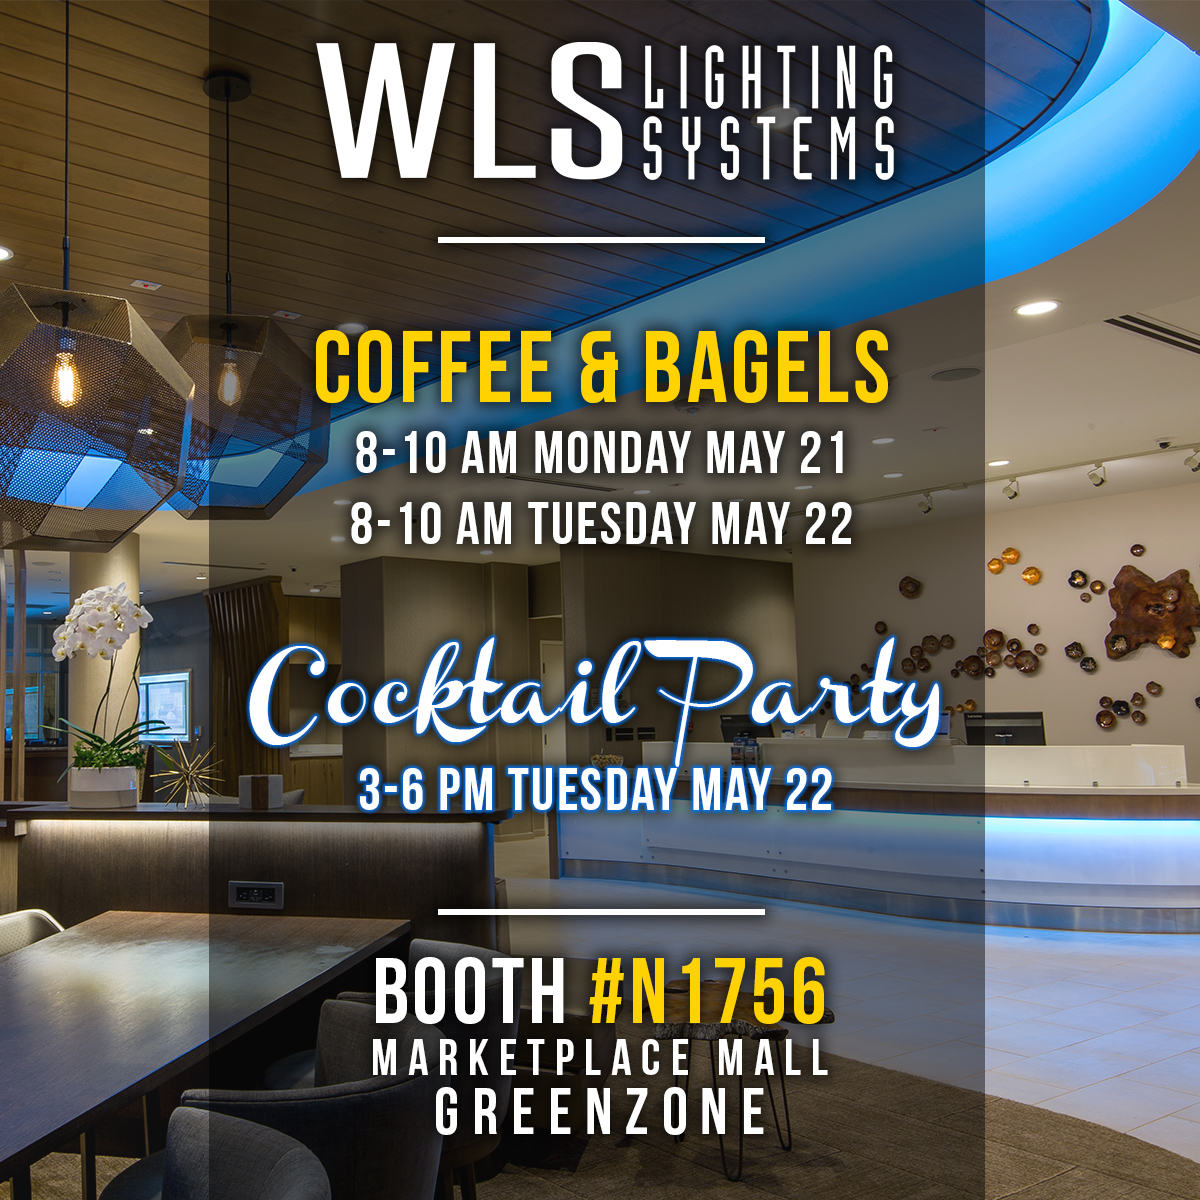 Booth Party Info - WLS Lighting Systems